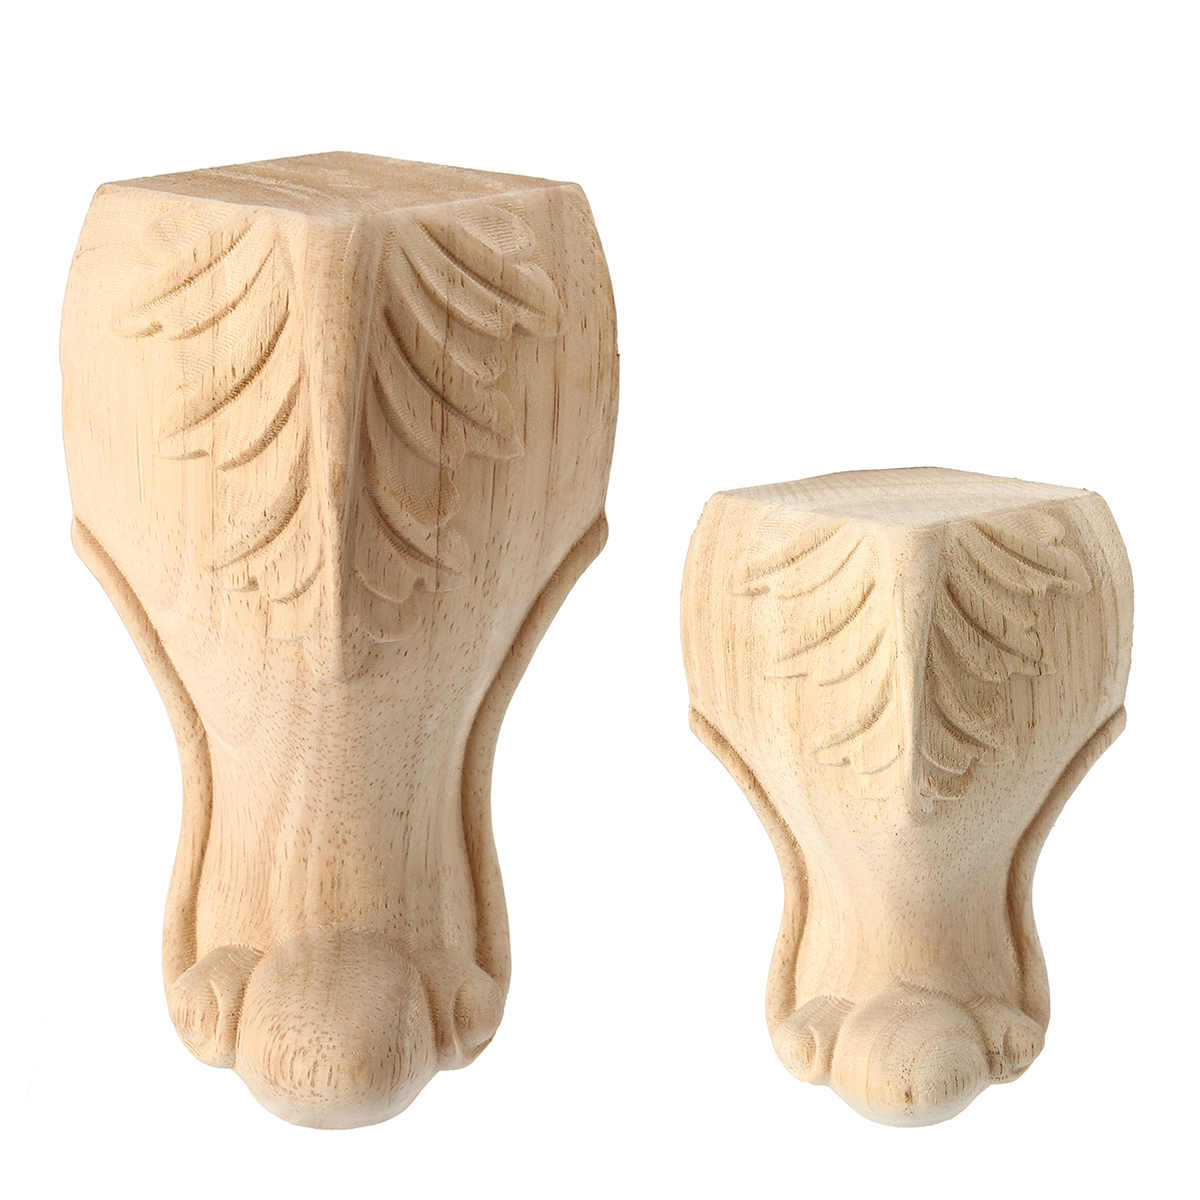 4Pcs-1015cm-European-Solid-Wood-Applique-Carving-Furniture-Foot-Legs-Unpainted-Cabinet-Feets-Decal-1322685-1